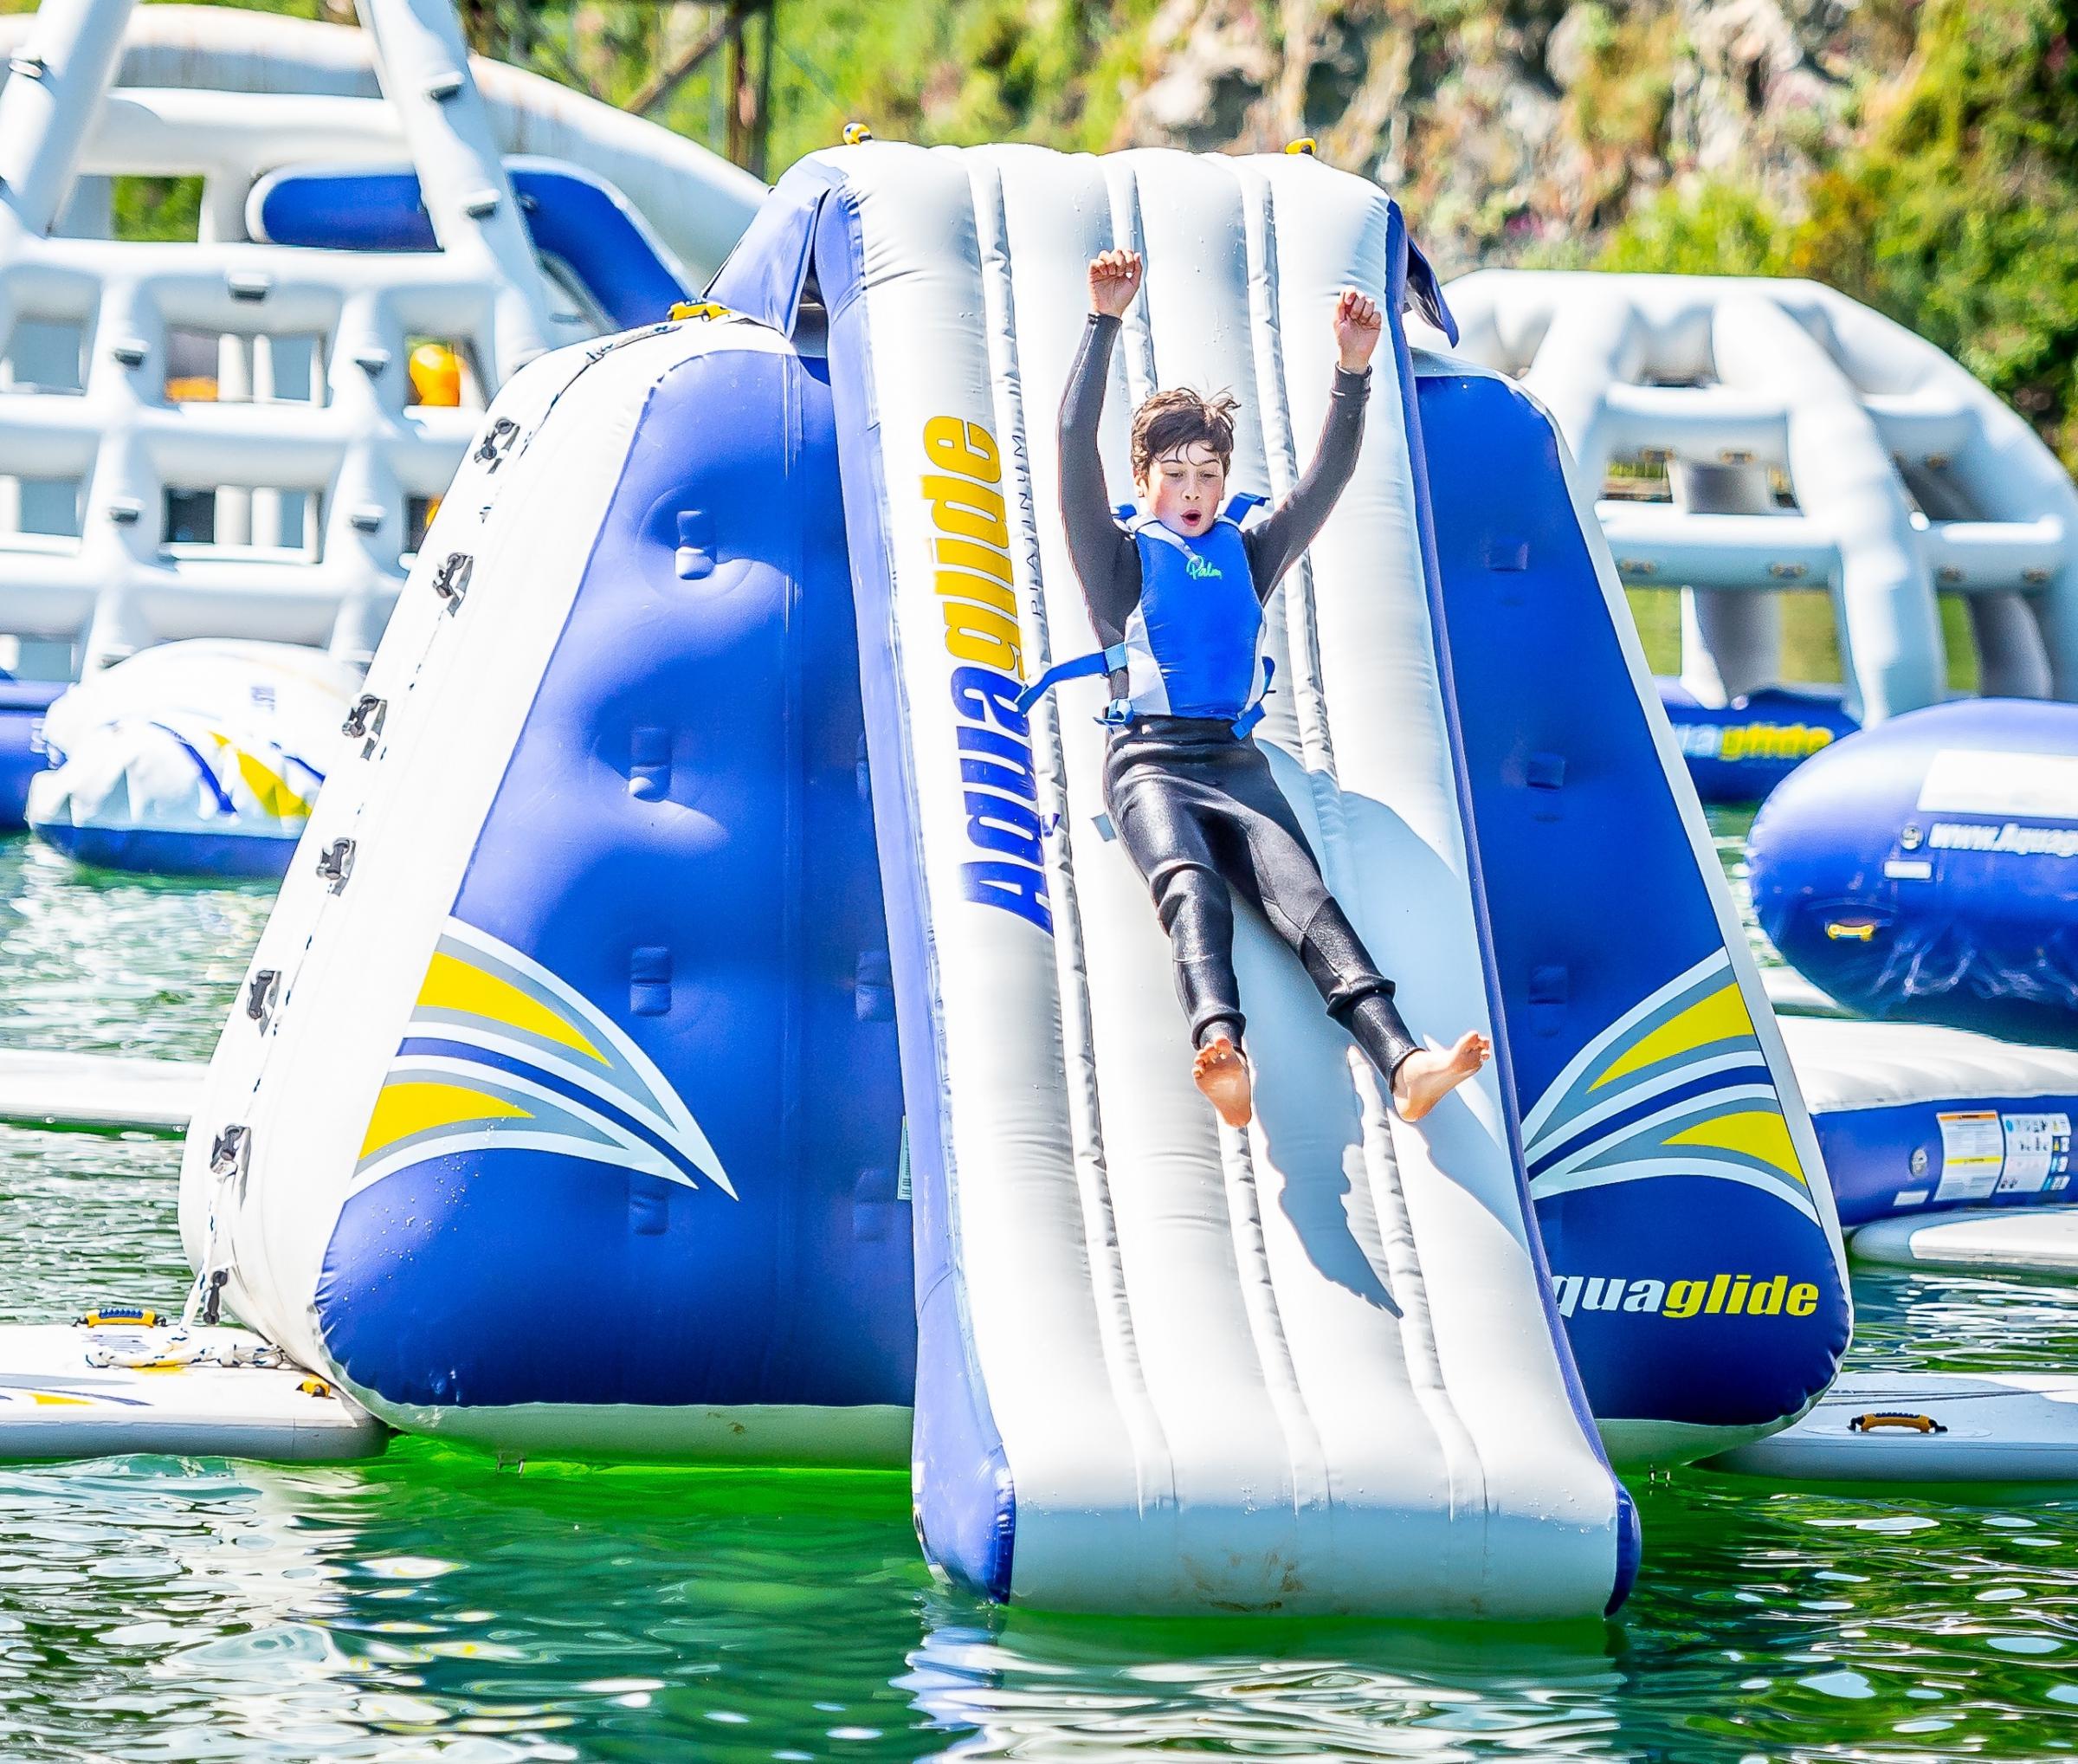 Two new inflatables are to be added to the park Picture: Adrenalin Quarry/Jon Shrimpton